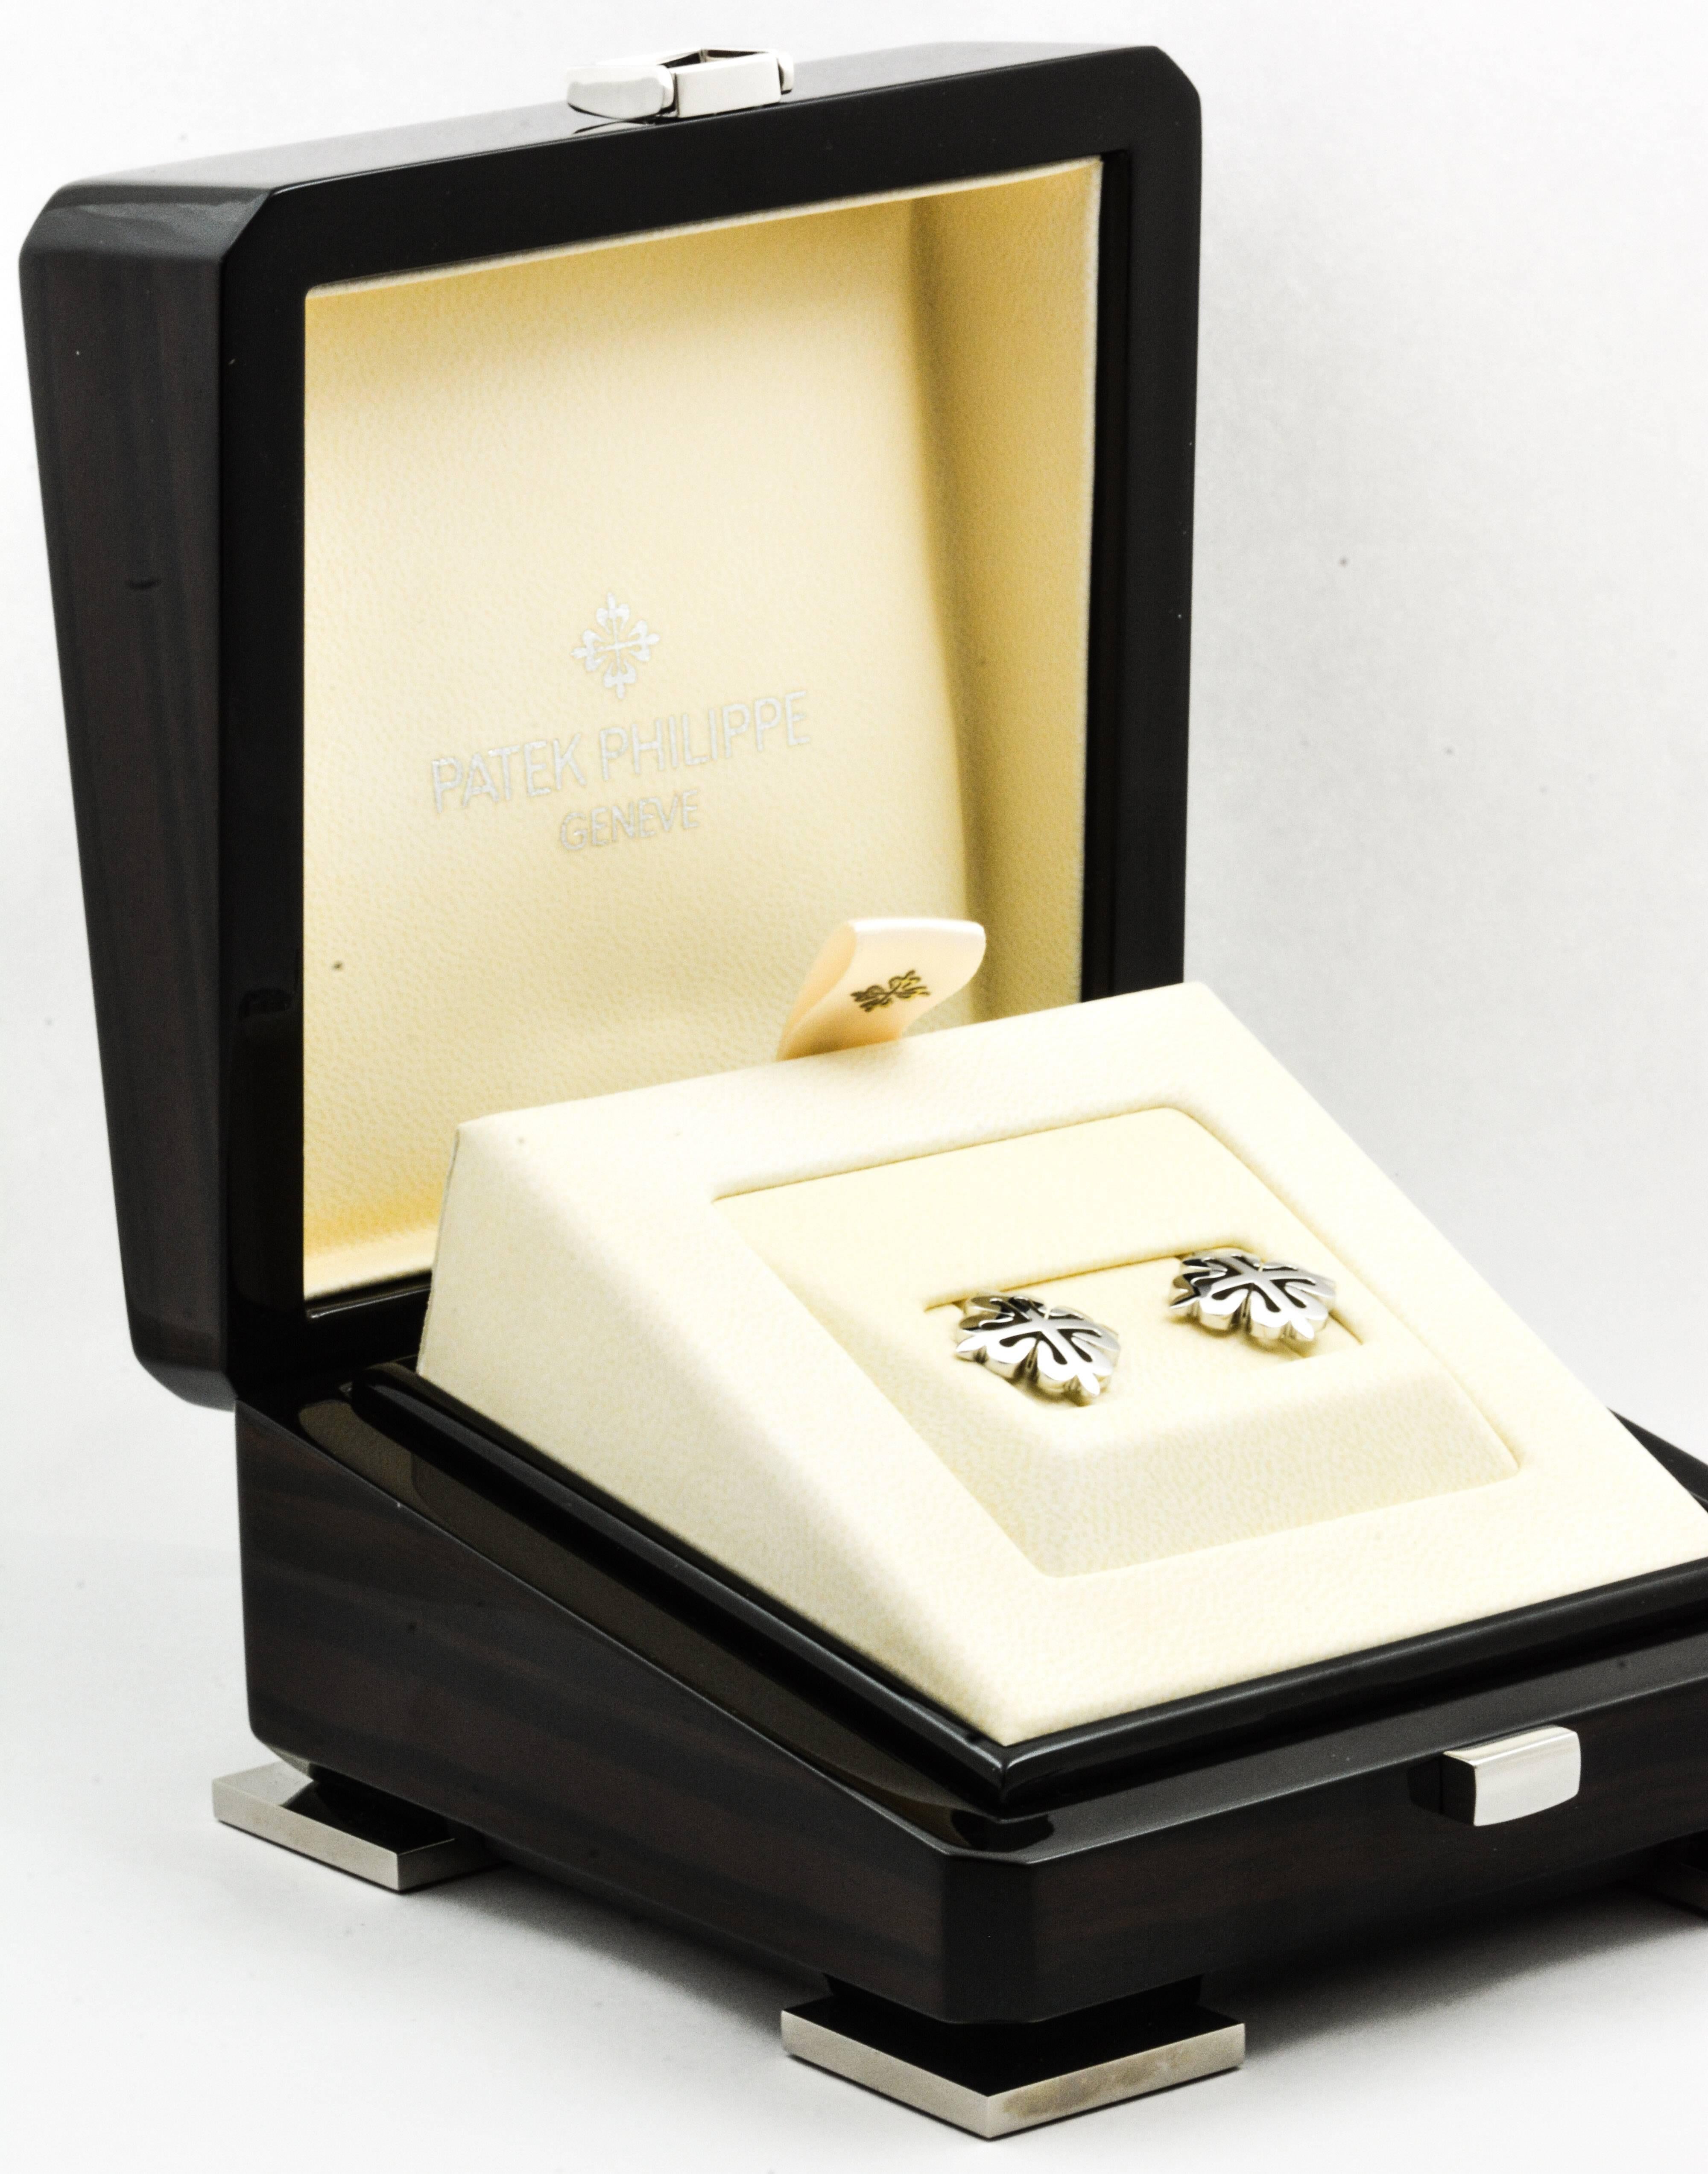 These classic Patek Philippe Calatrava Cross cuff links are fashioned in an 18kt white gold mirror finished high polish.  These Patek Philippe cufflinks measure 19.36X19.36mm  and are fitted with extremely high quality backs.  These Calatrava Cross